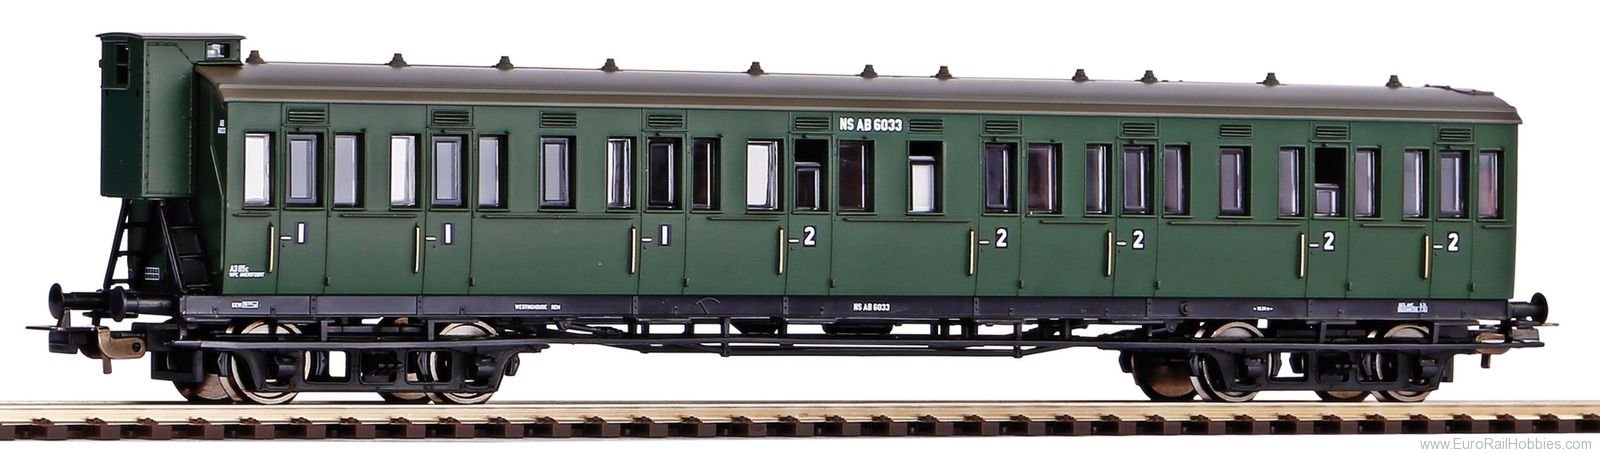 Piko 53316 AB 6033 Compartment coach with brakeman's cab